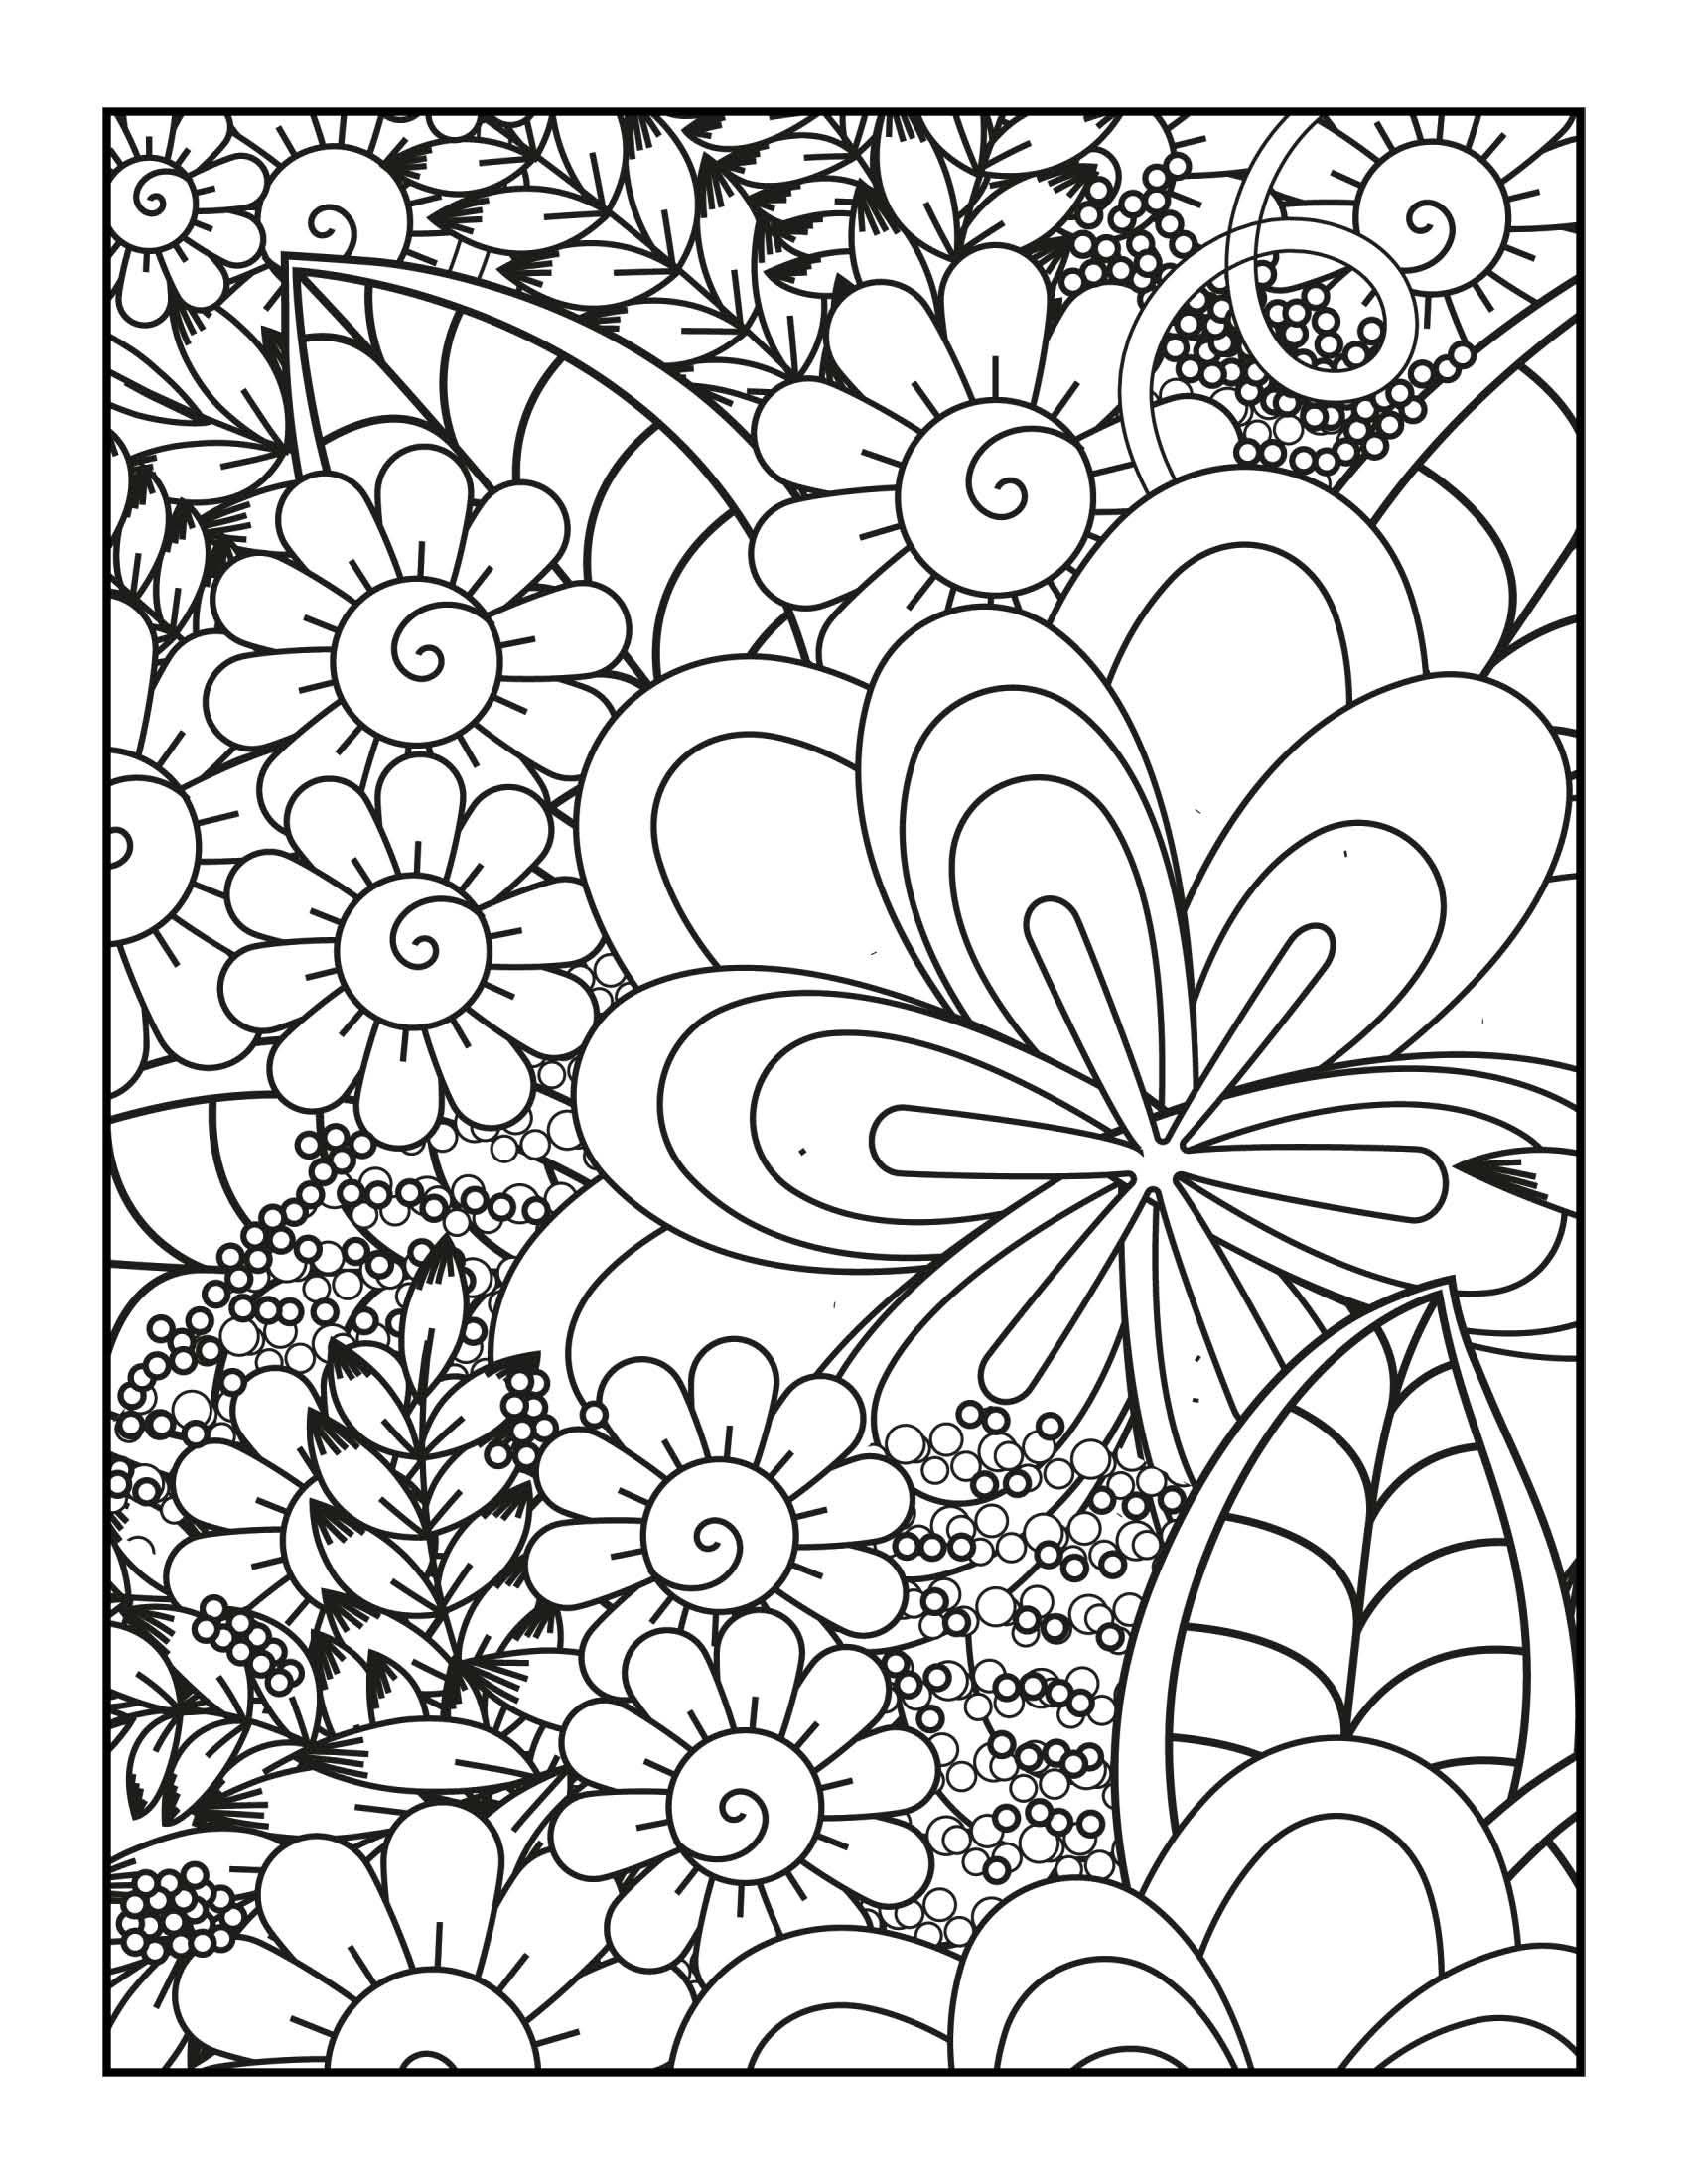 Simple Large Print Coloring Book for Adults with Relaxing Flowers - Volume  2: 40 Easy, Big and Beautiful Flower Designs for Adults, Seniors and  Beginners. (Large Print Flower Coloring Series): Press, IslandSmiles